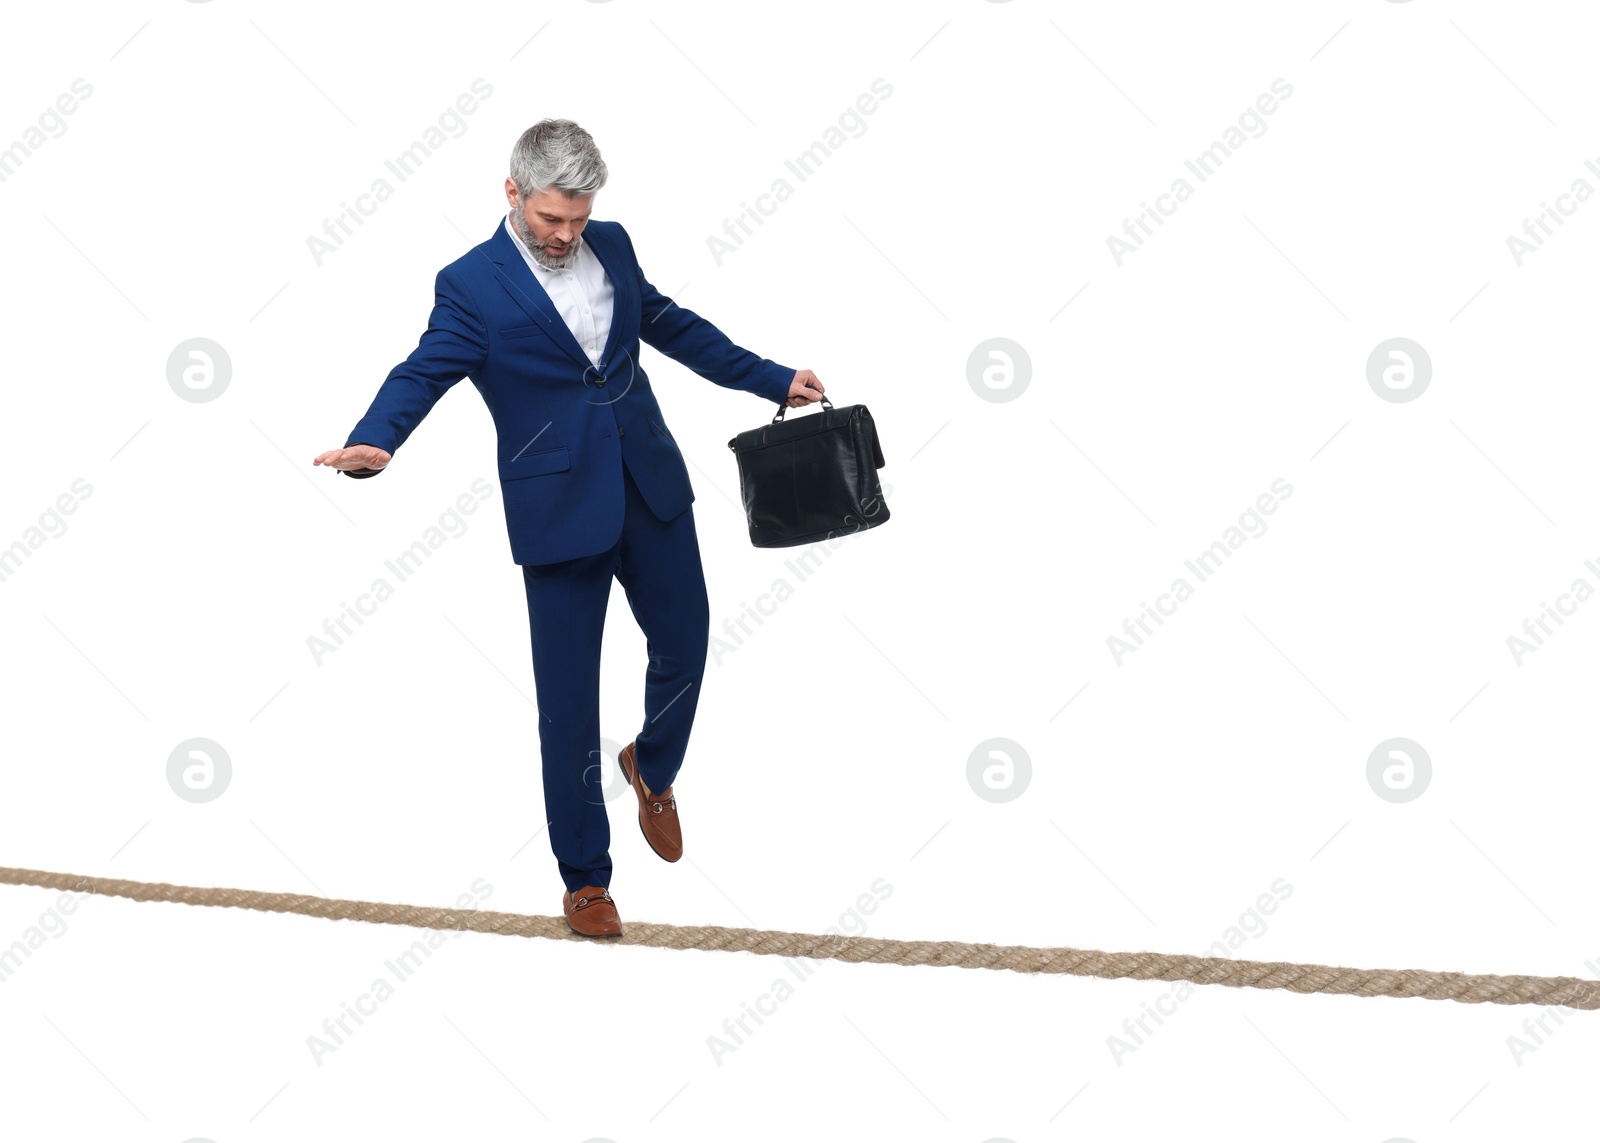 Image of Risks and challenges of owning business. Man with briefcase balancing on rope against white background